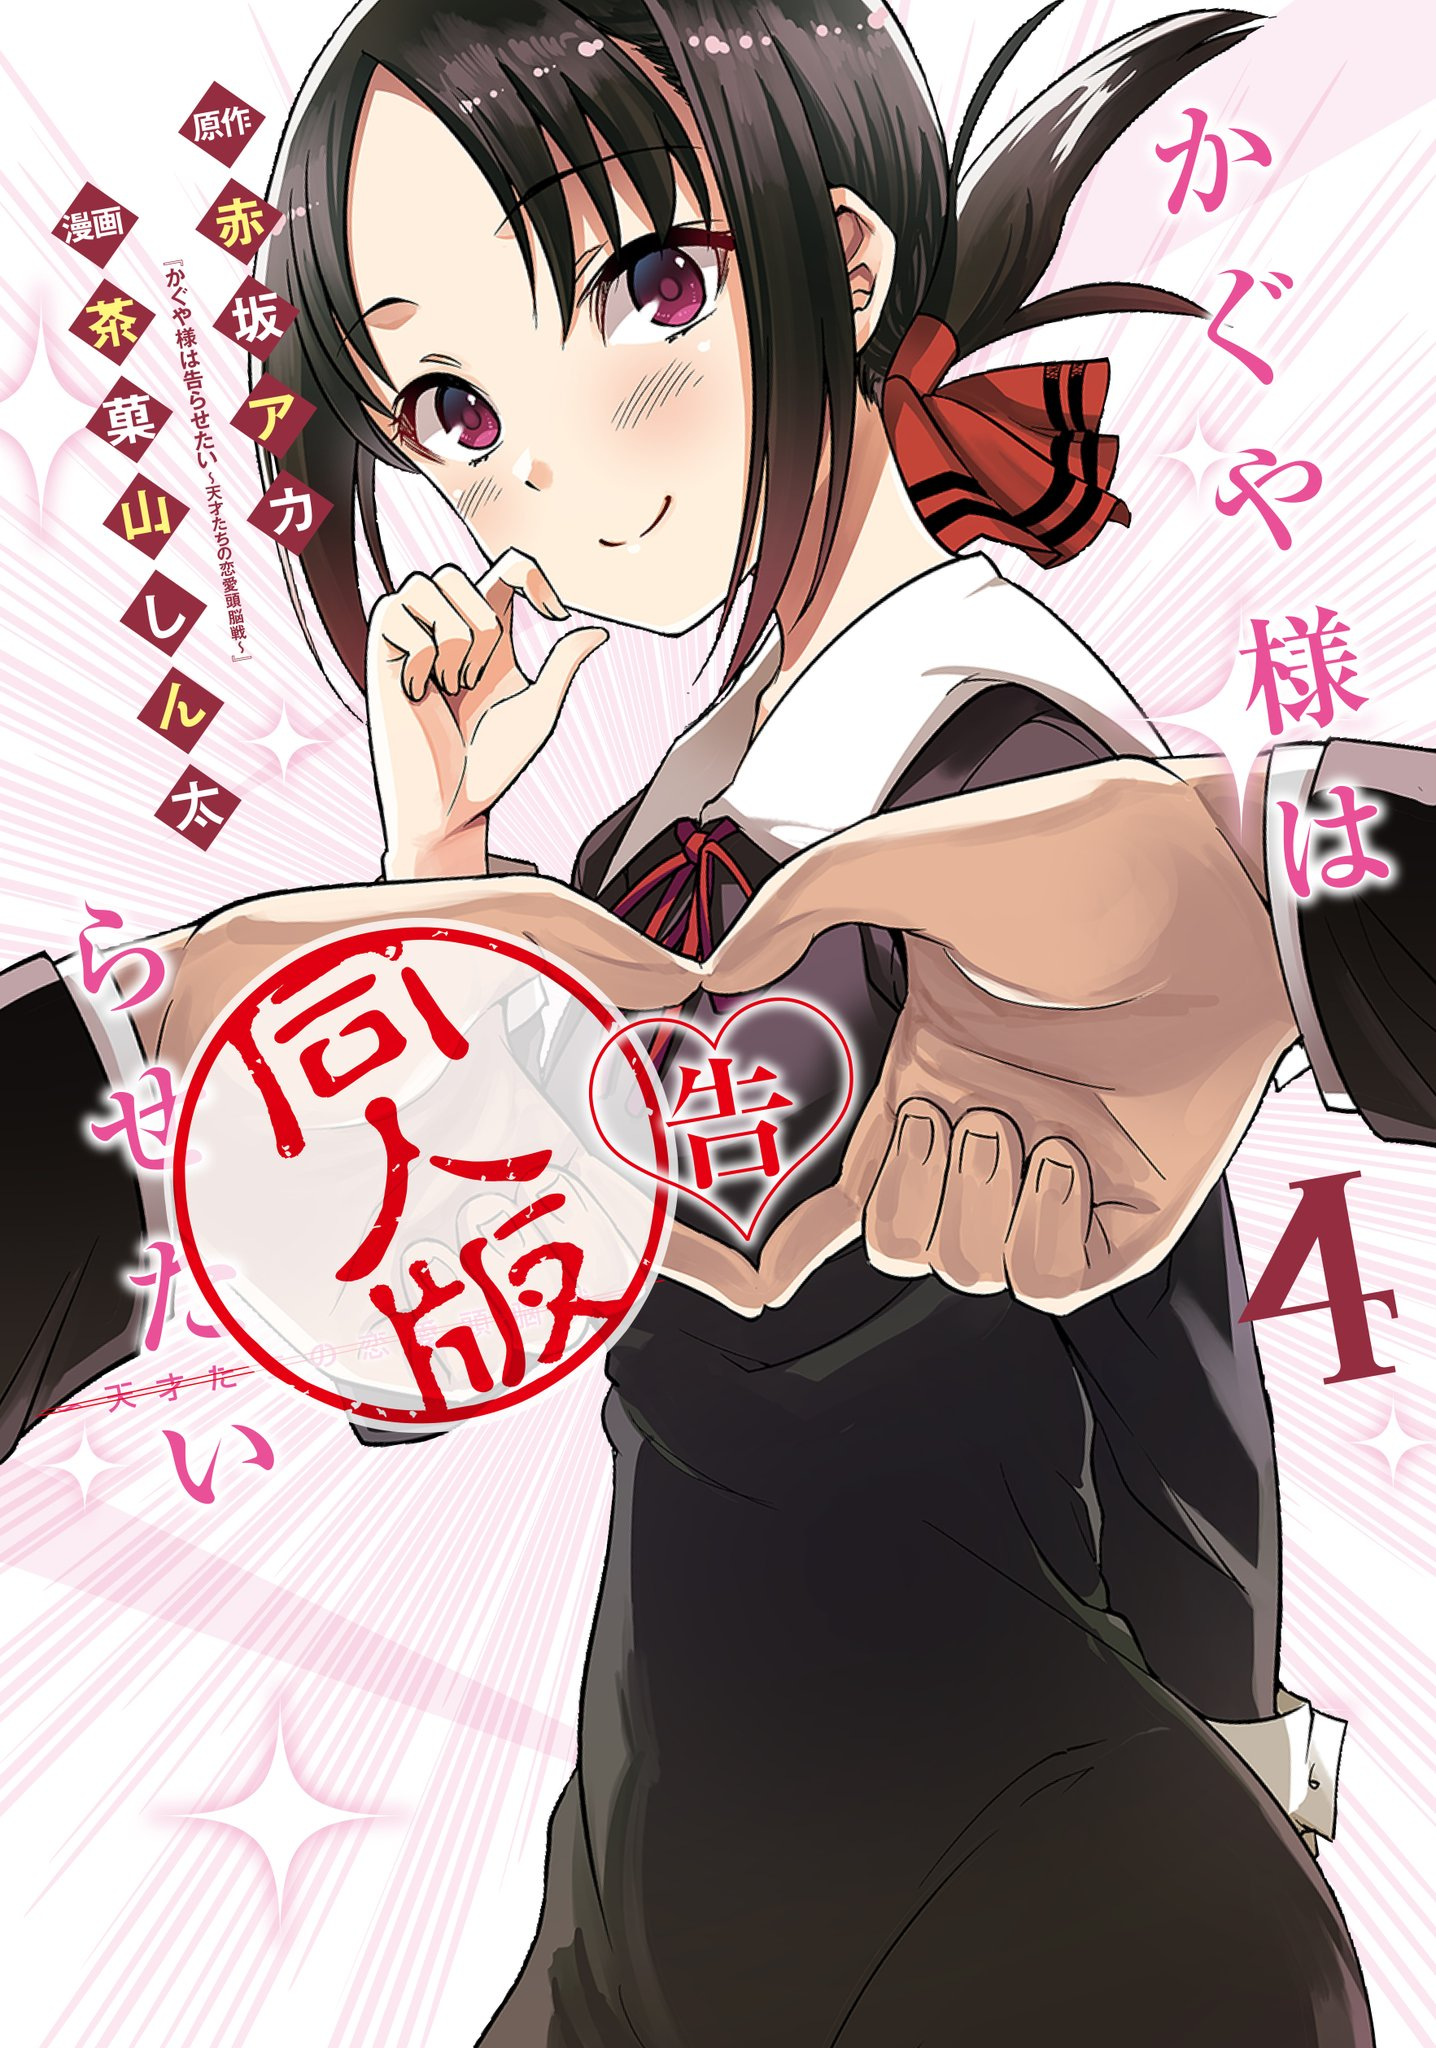 Kaguya Wants To Be Confessed To Official Doujin manga